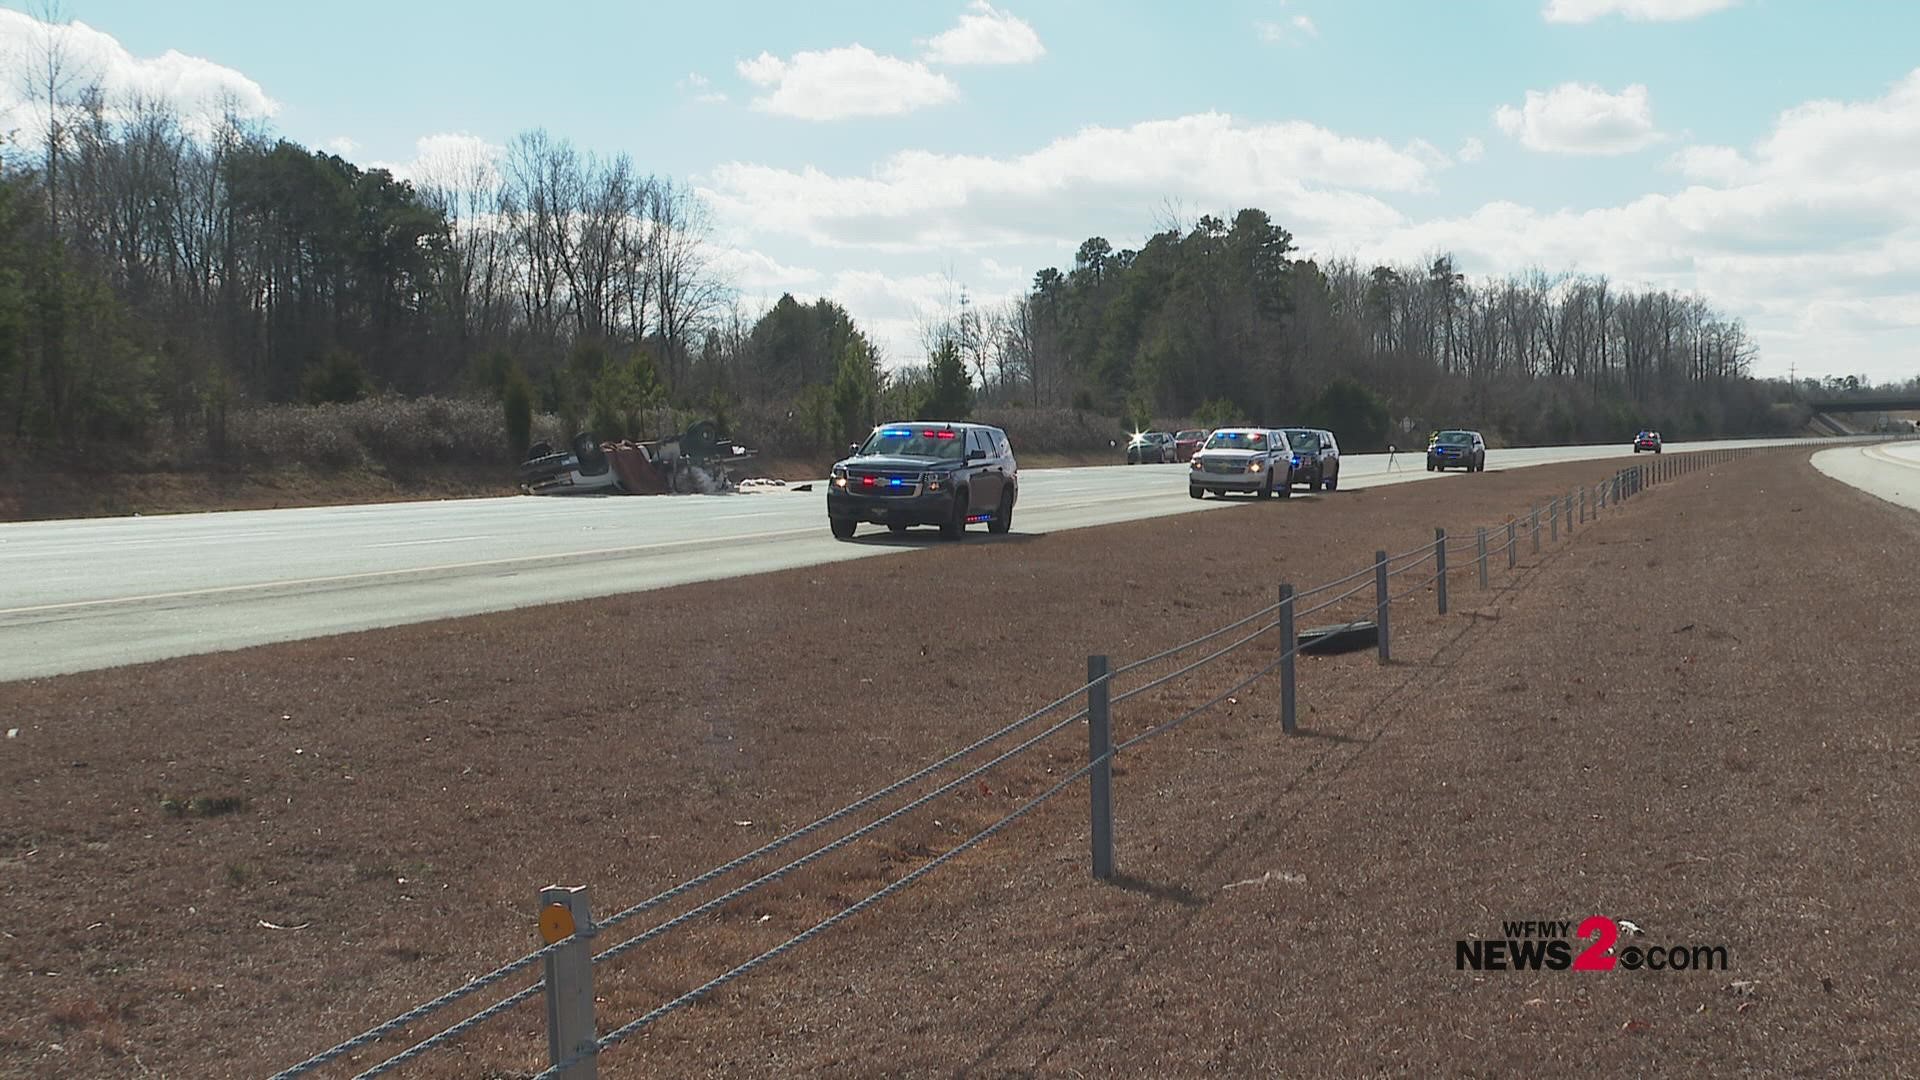 Greensboro police said a person is dead after a crash on I-85 Thursday.